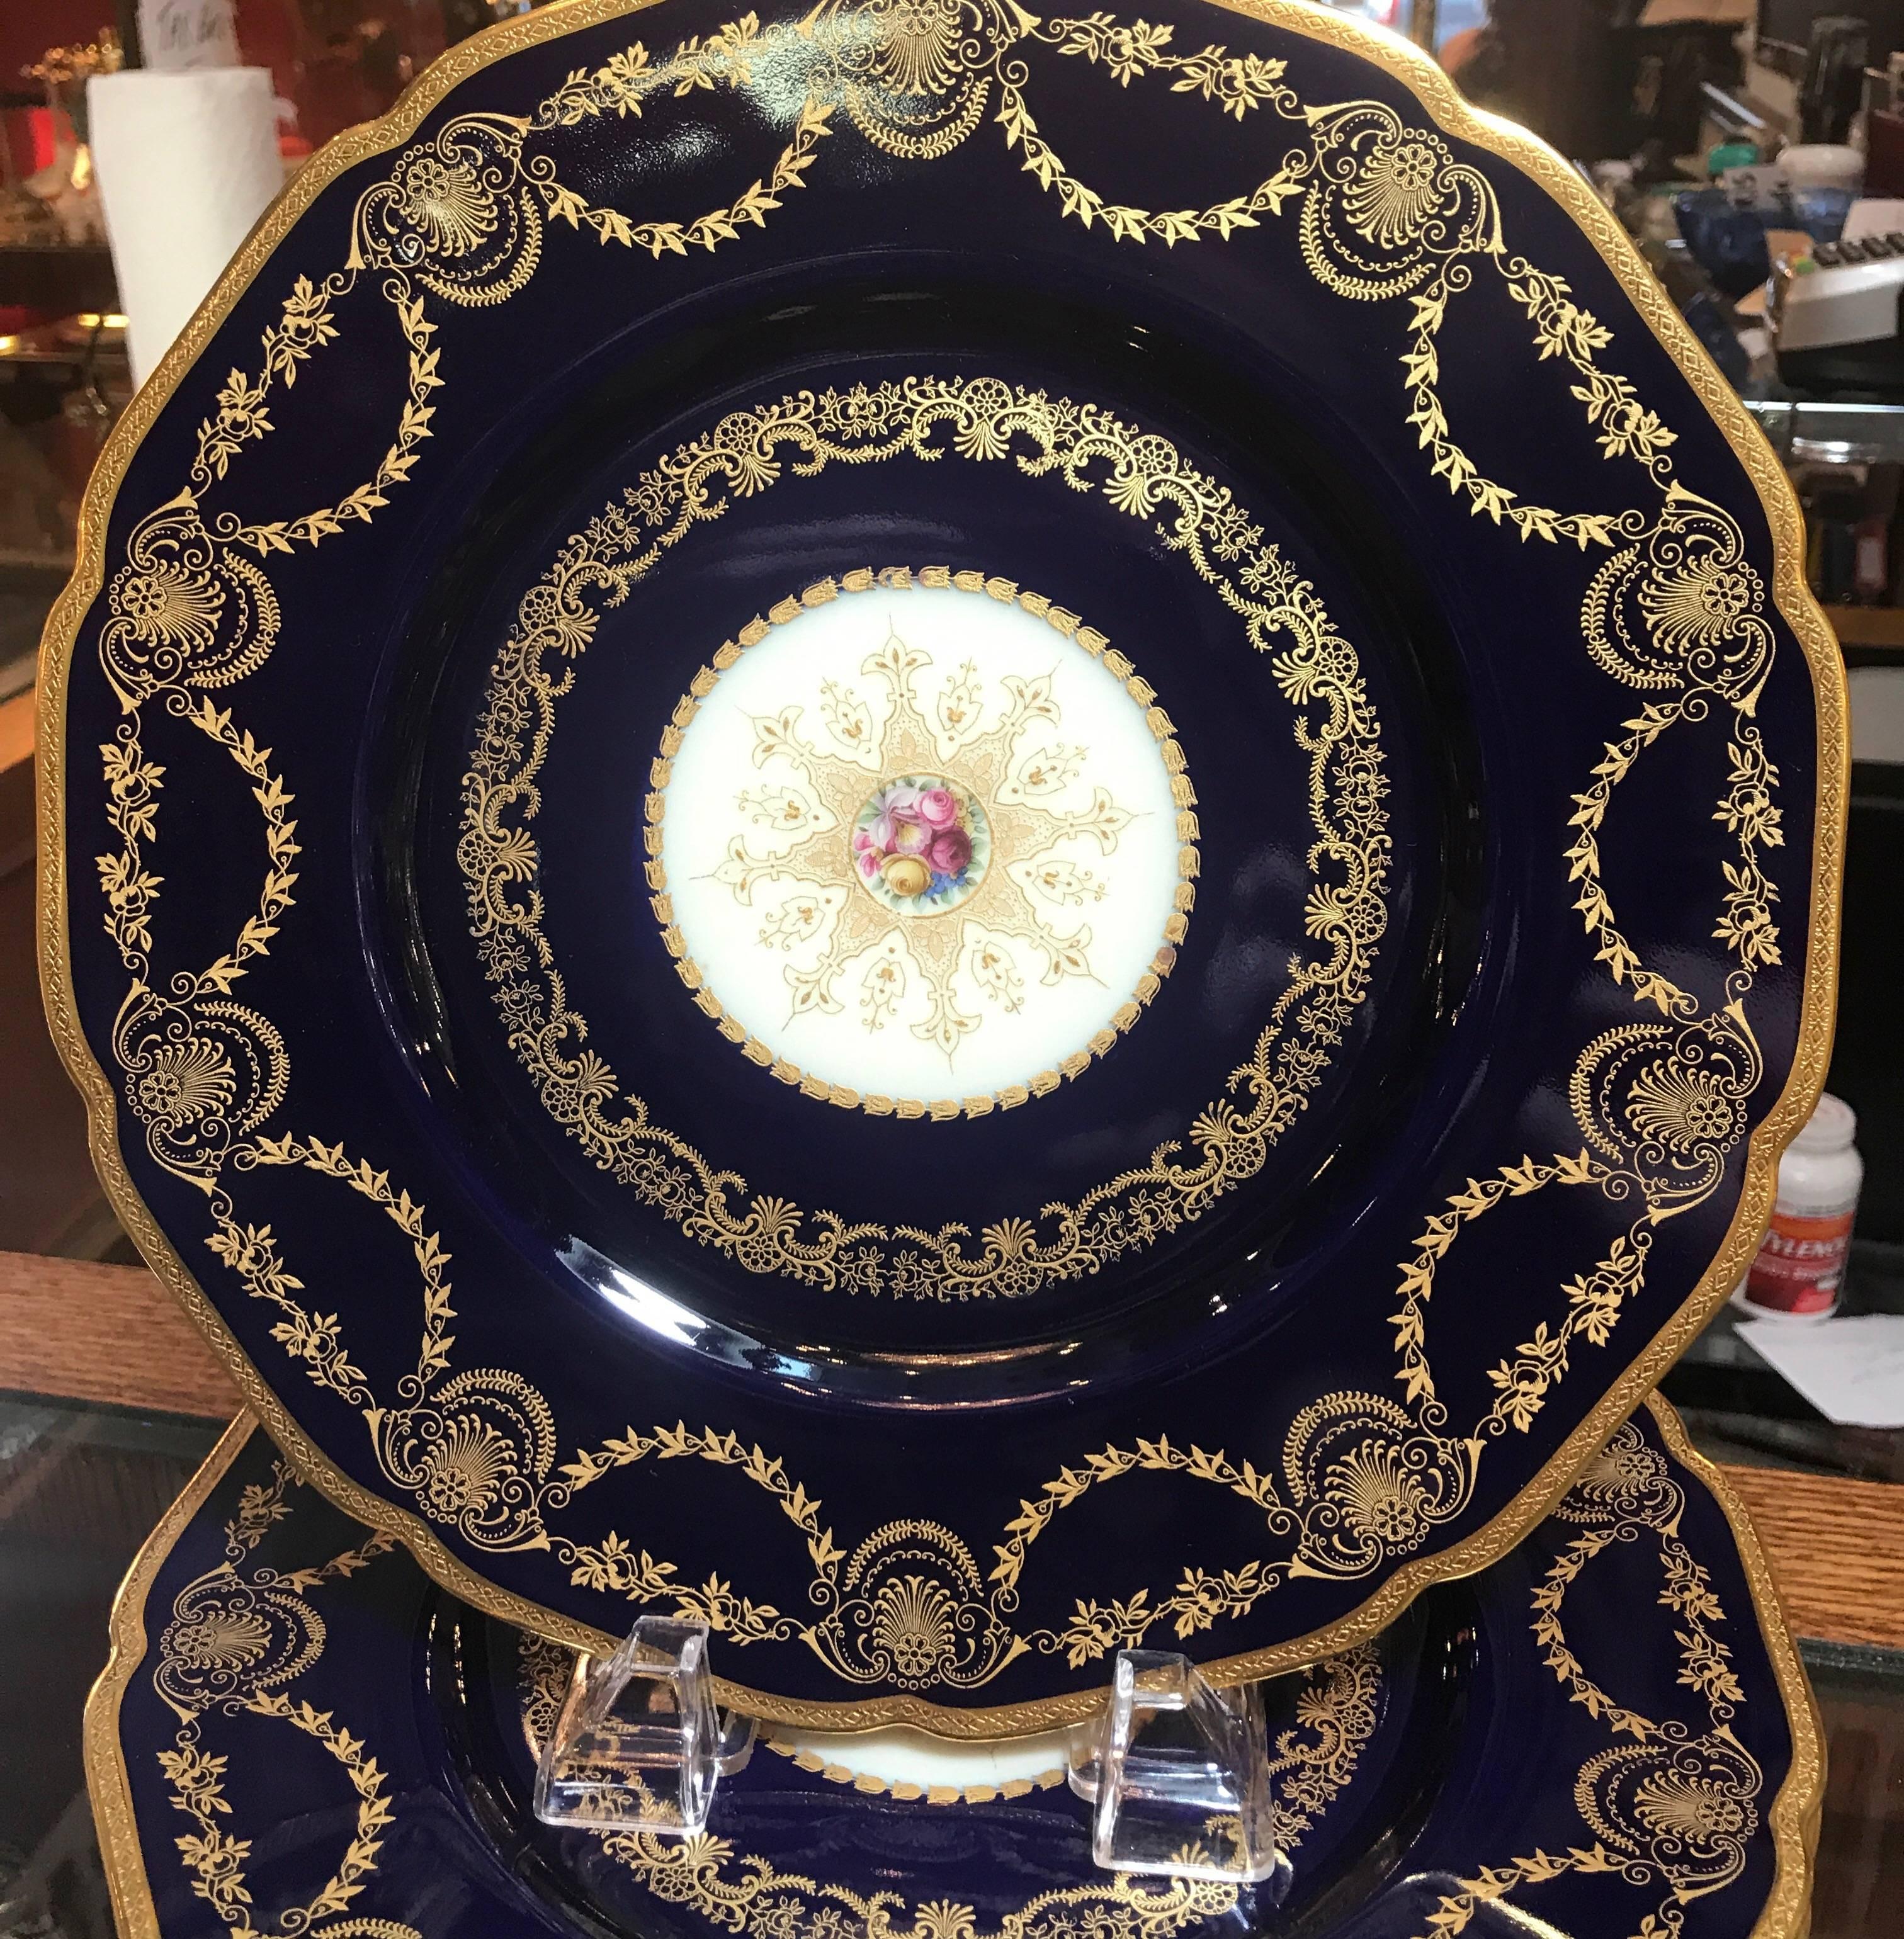 Elegant and opulent deep cobalt blue service plates. The rich borders with gilt swags and borders with a center gilt medallion with Dresden floral cartouch. Grace and style from the gilded age, early 20th century.